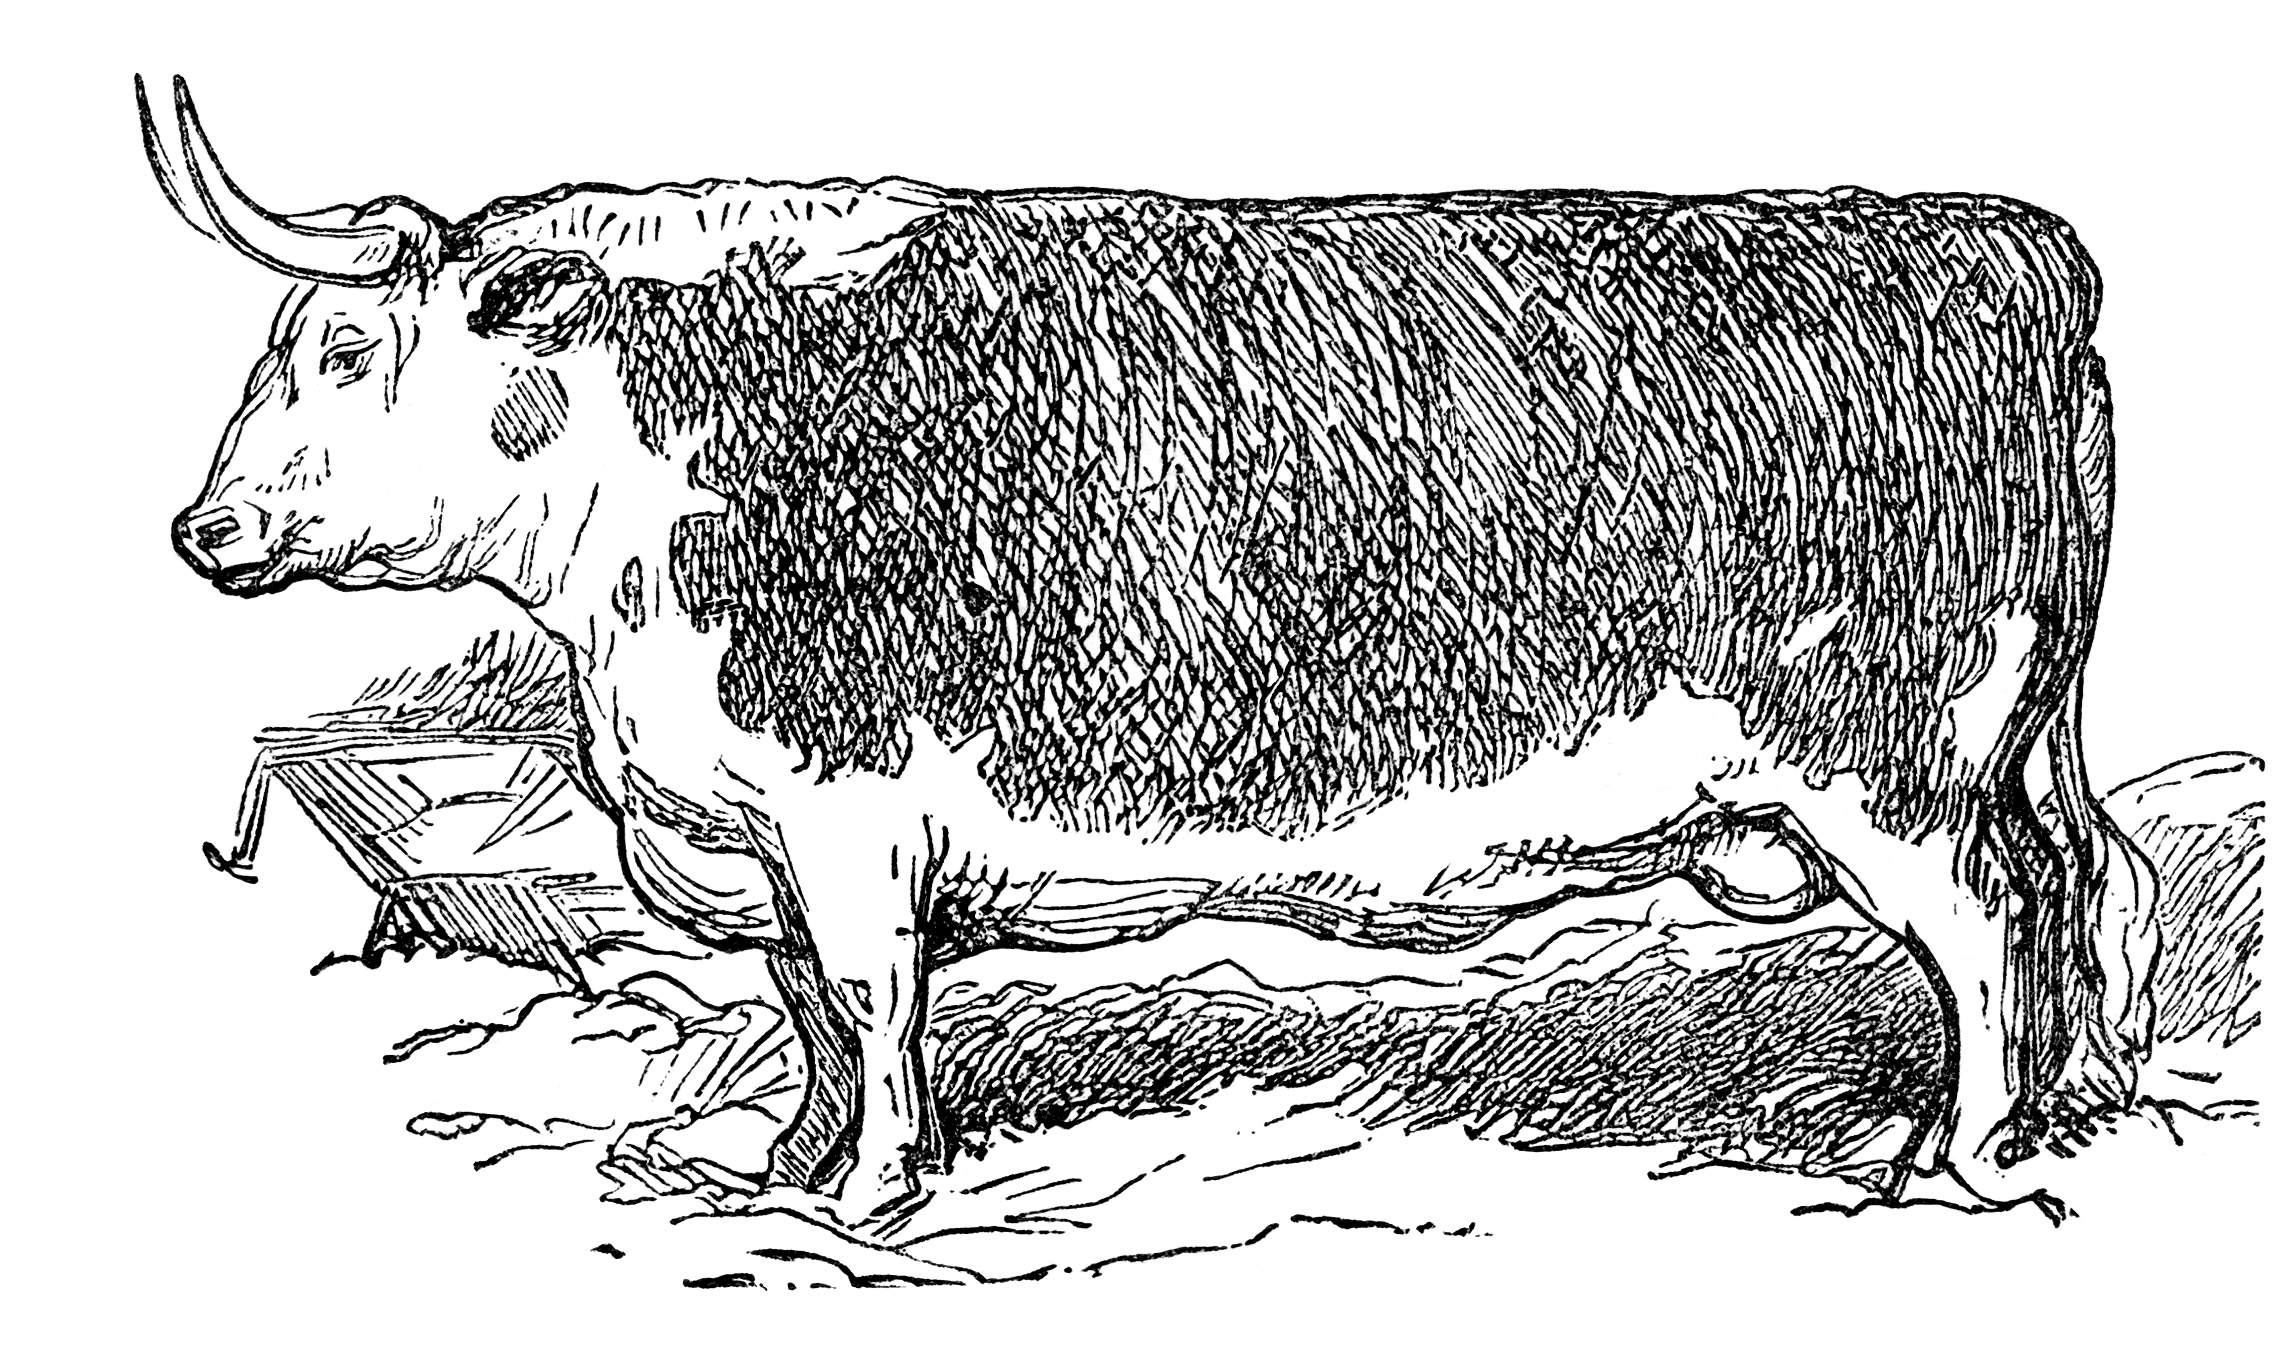 vintage cow clipart, mrs beeton hereford steer, black and white printable, bull with horns image, public domain animal illustration